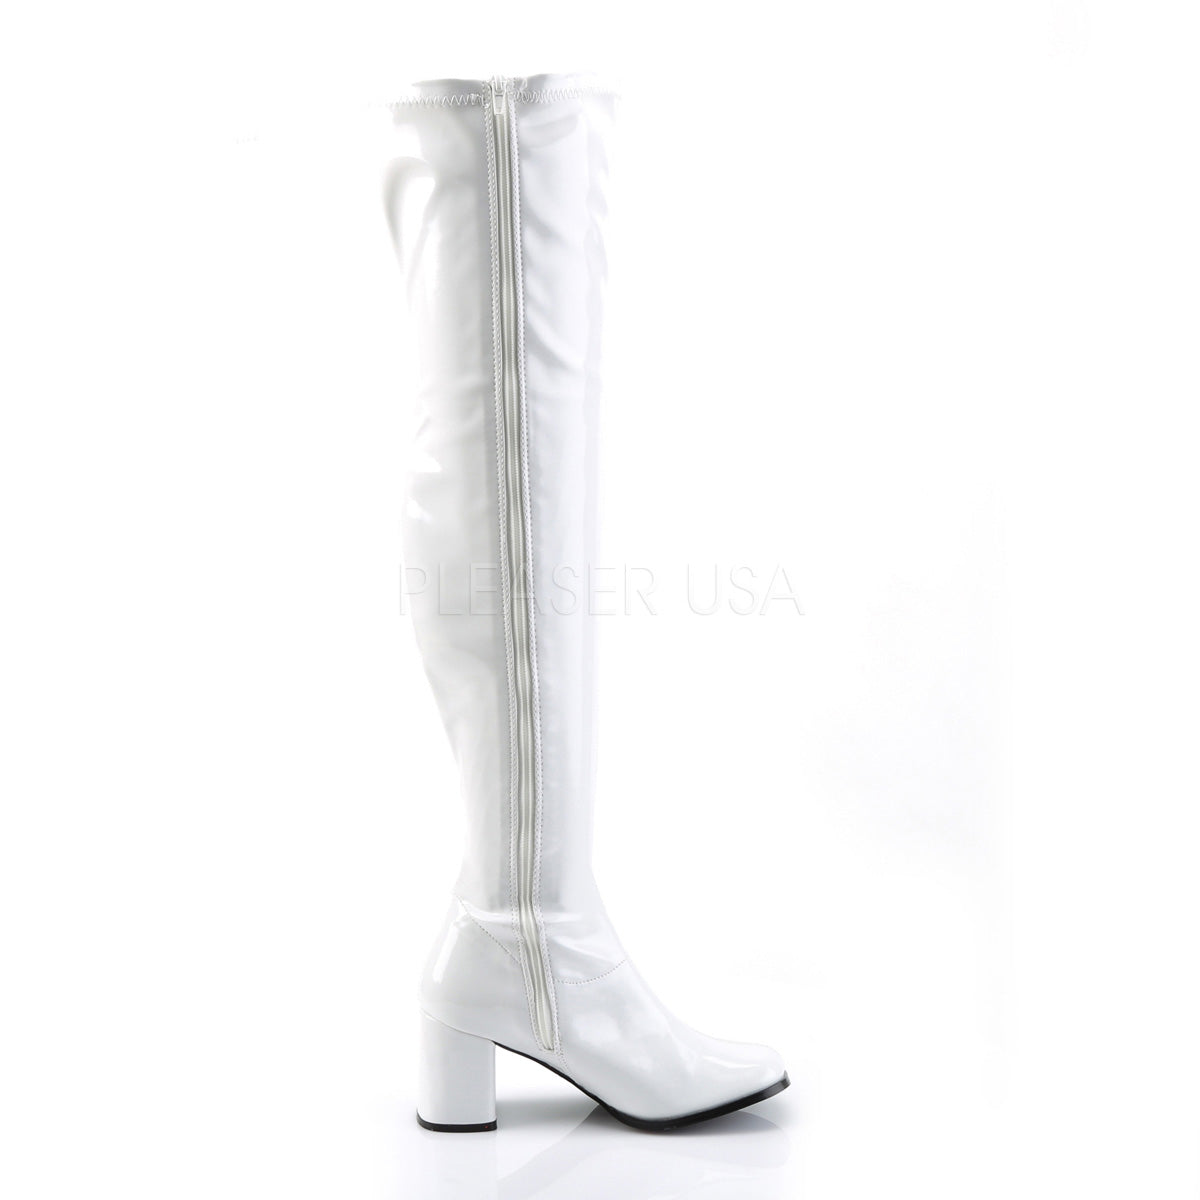 3 inch thigh high boots